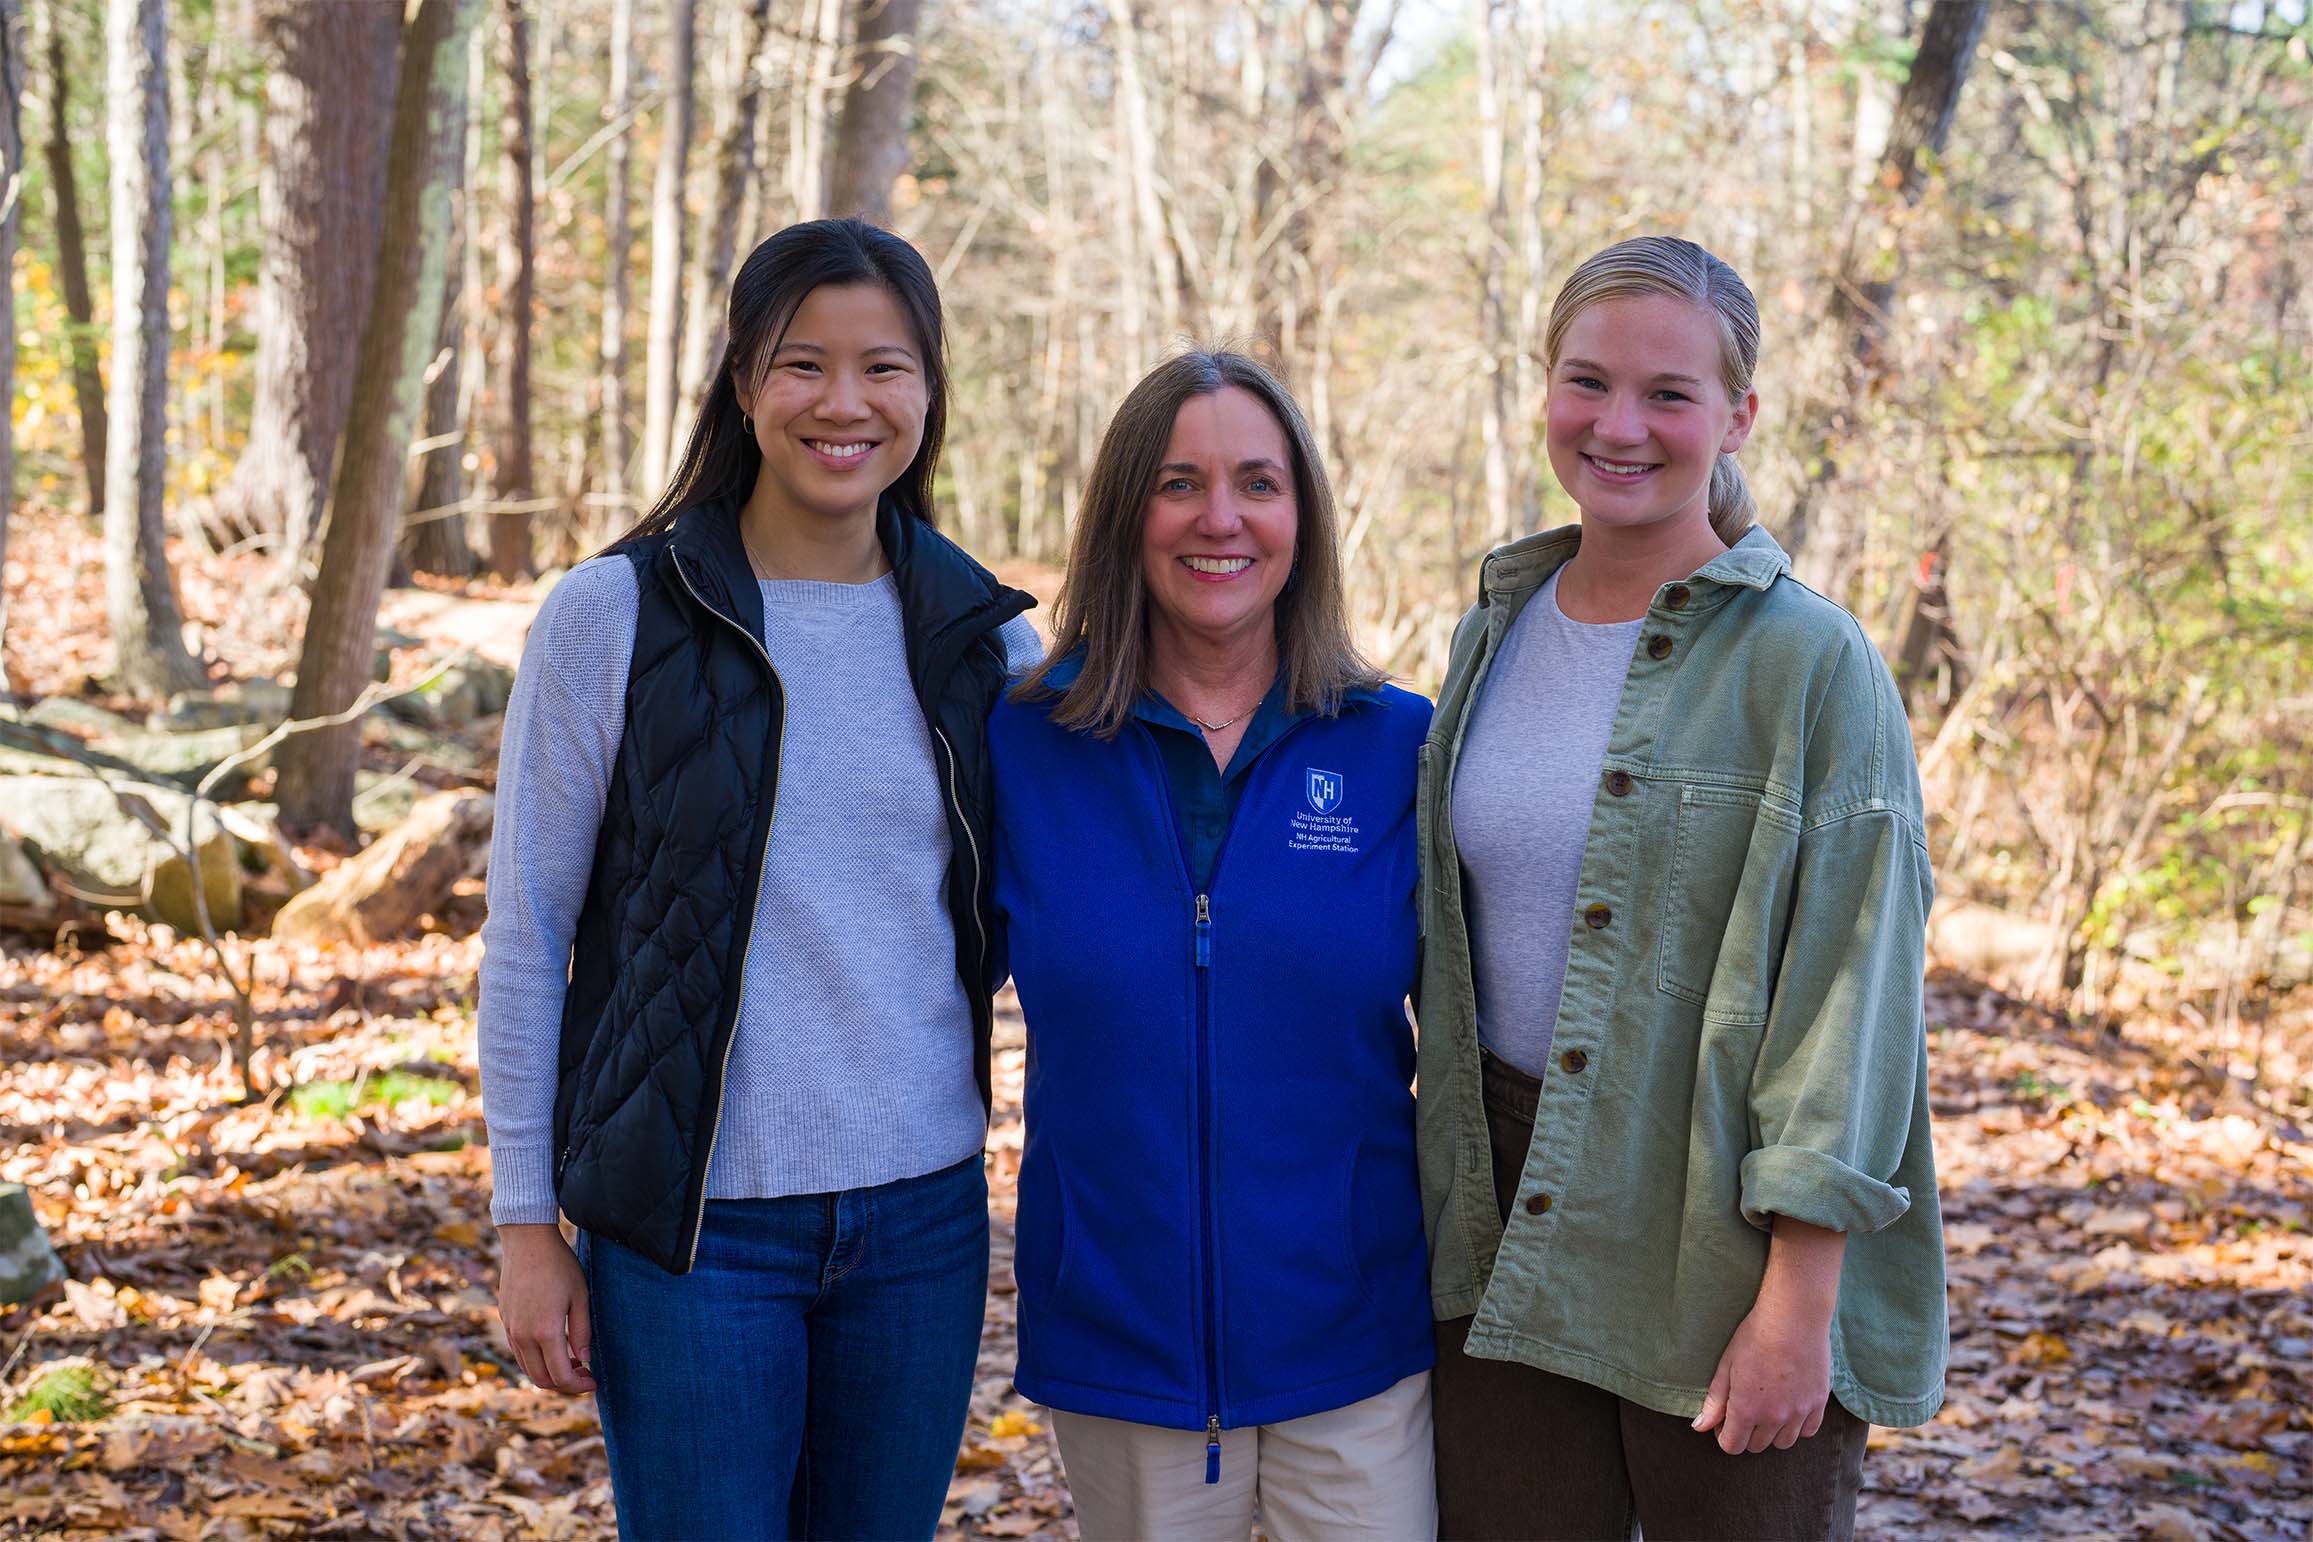 COLSA’s St. Martin Career Exploration Office donor Christine Carberry ’82 (located center) stands with two students in UNH's College Woods.